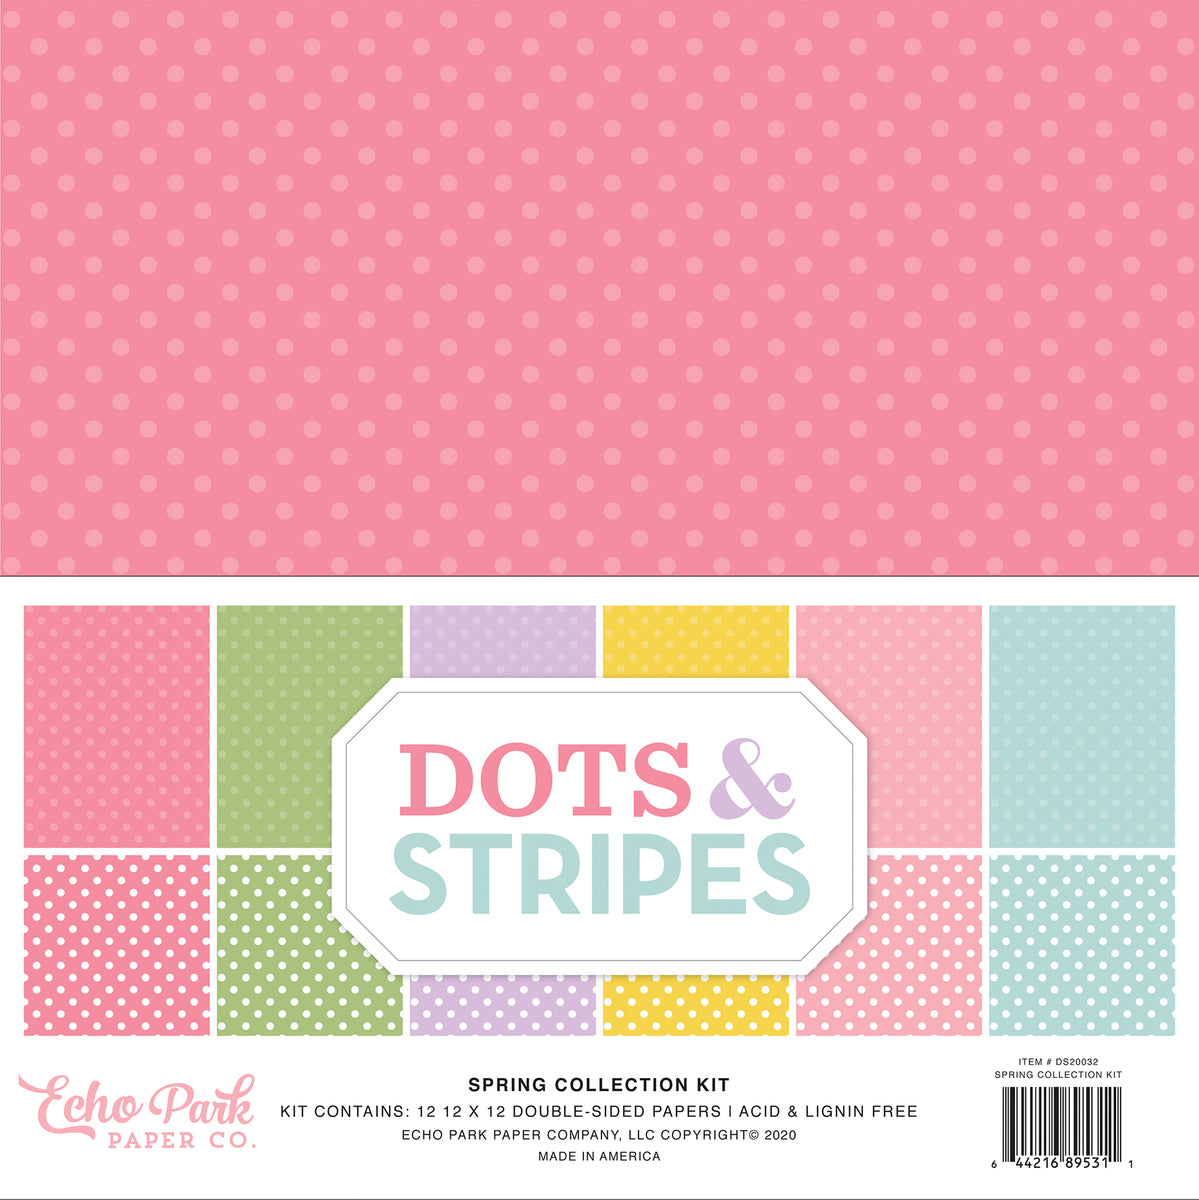 Spring Dots Collection Kit includes 12 double-sided patterned papers in six pastel colors for spring - Echo Park Paper